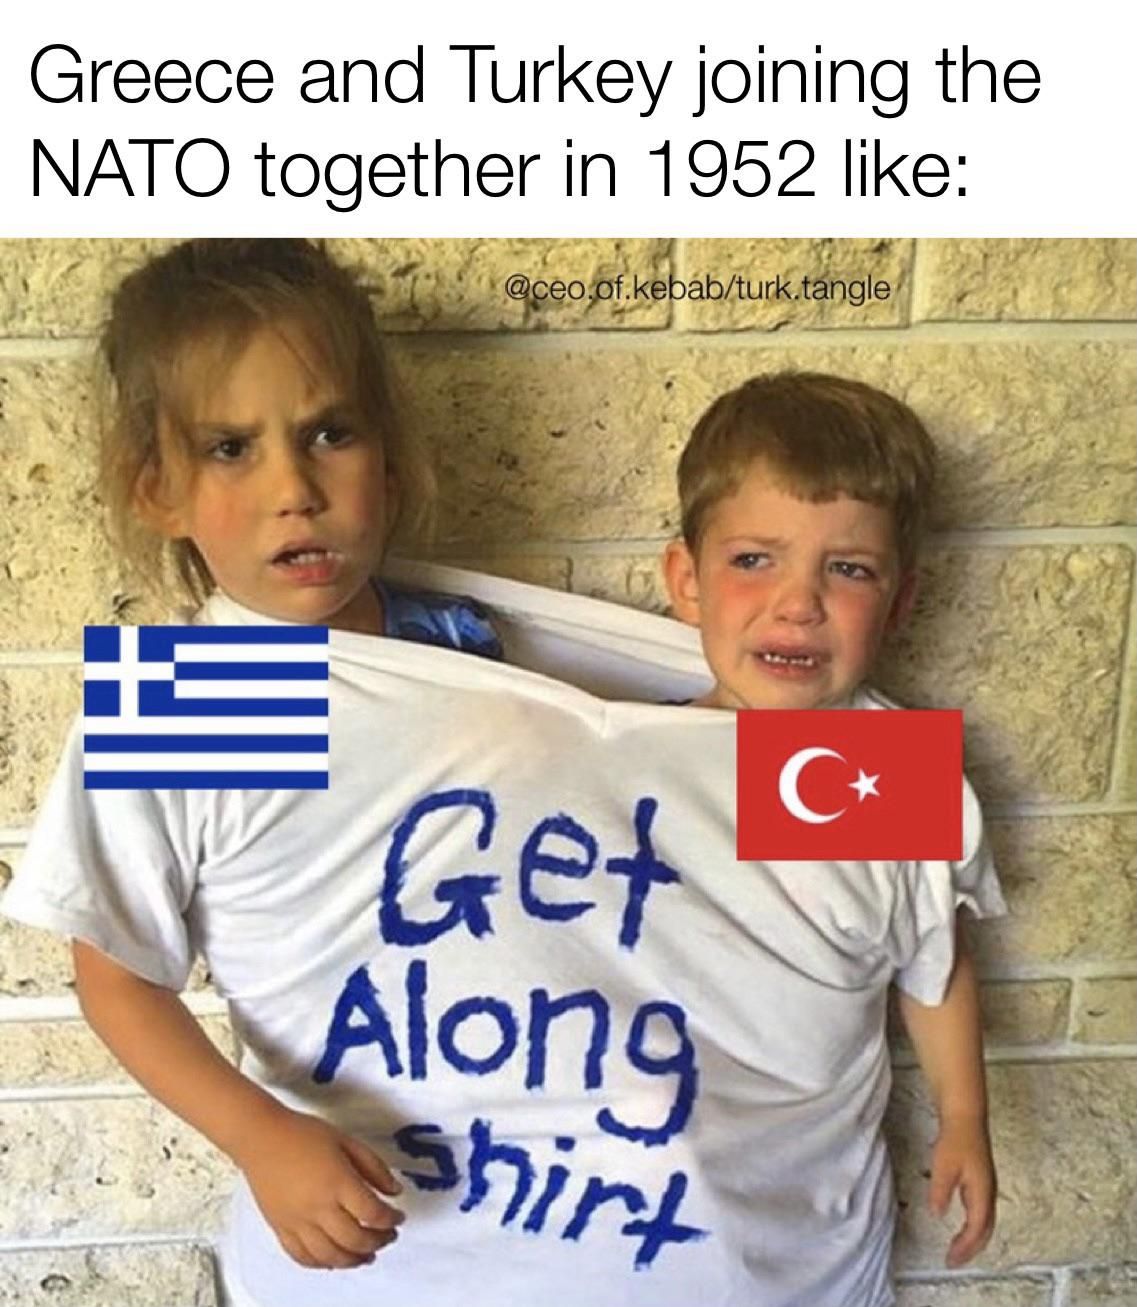 the turkish-greek relations is one of the funniest phenomena in human history